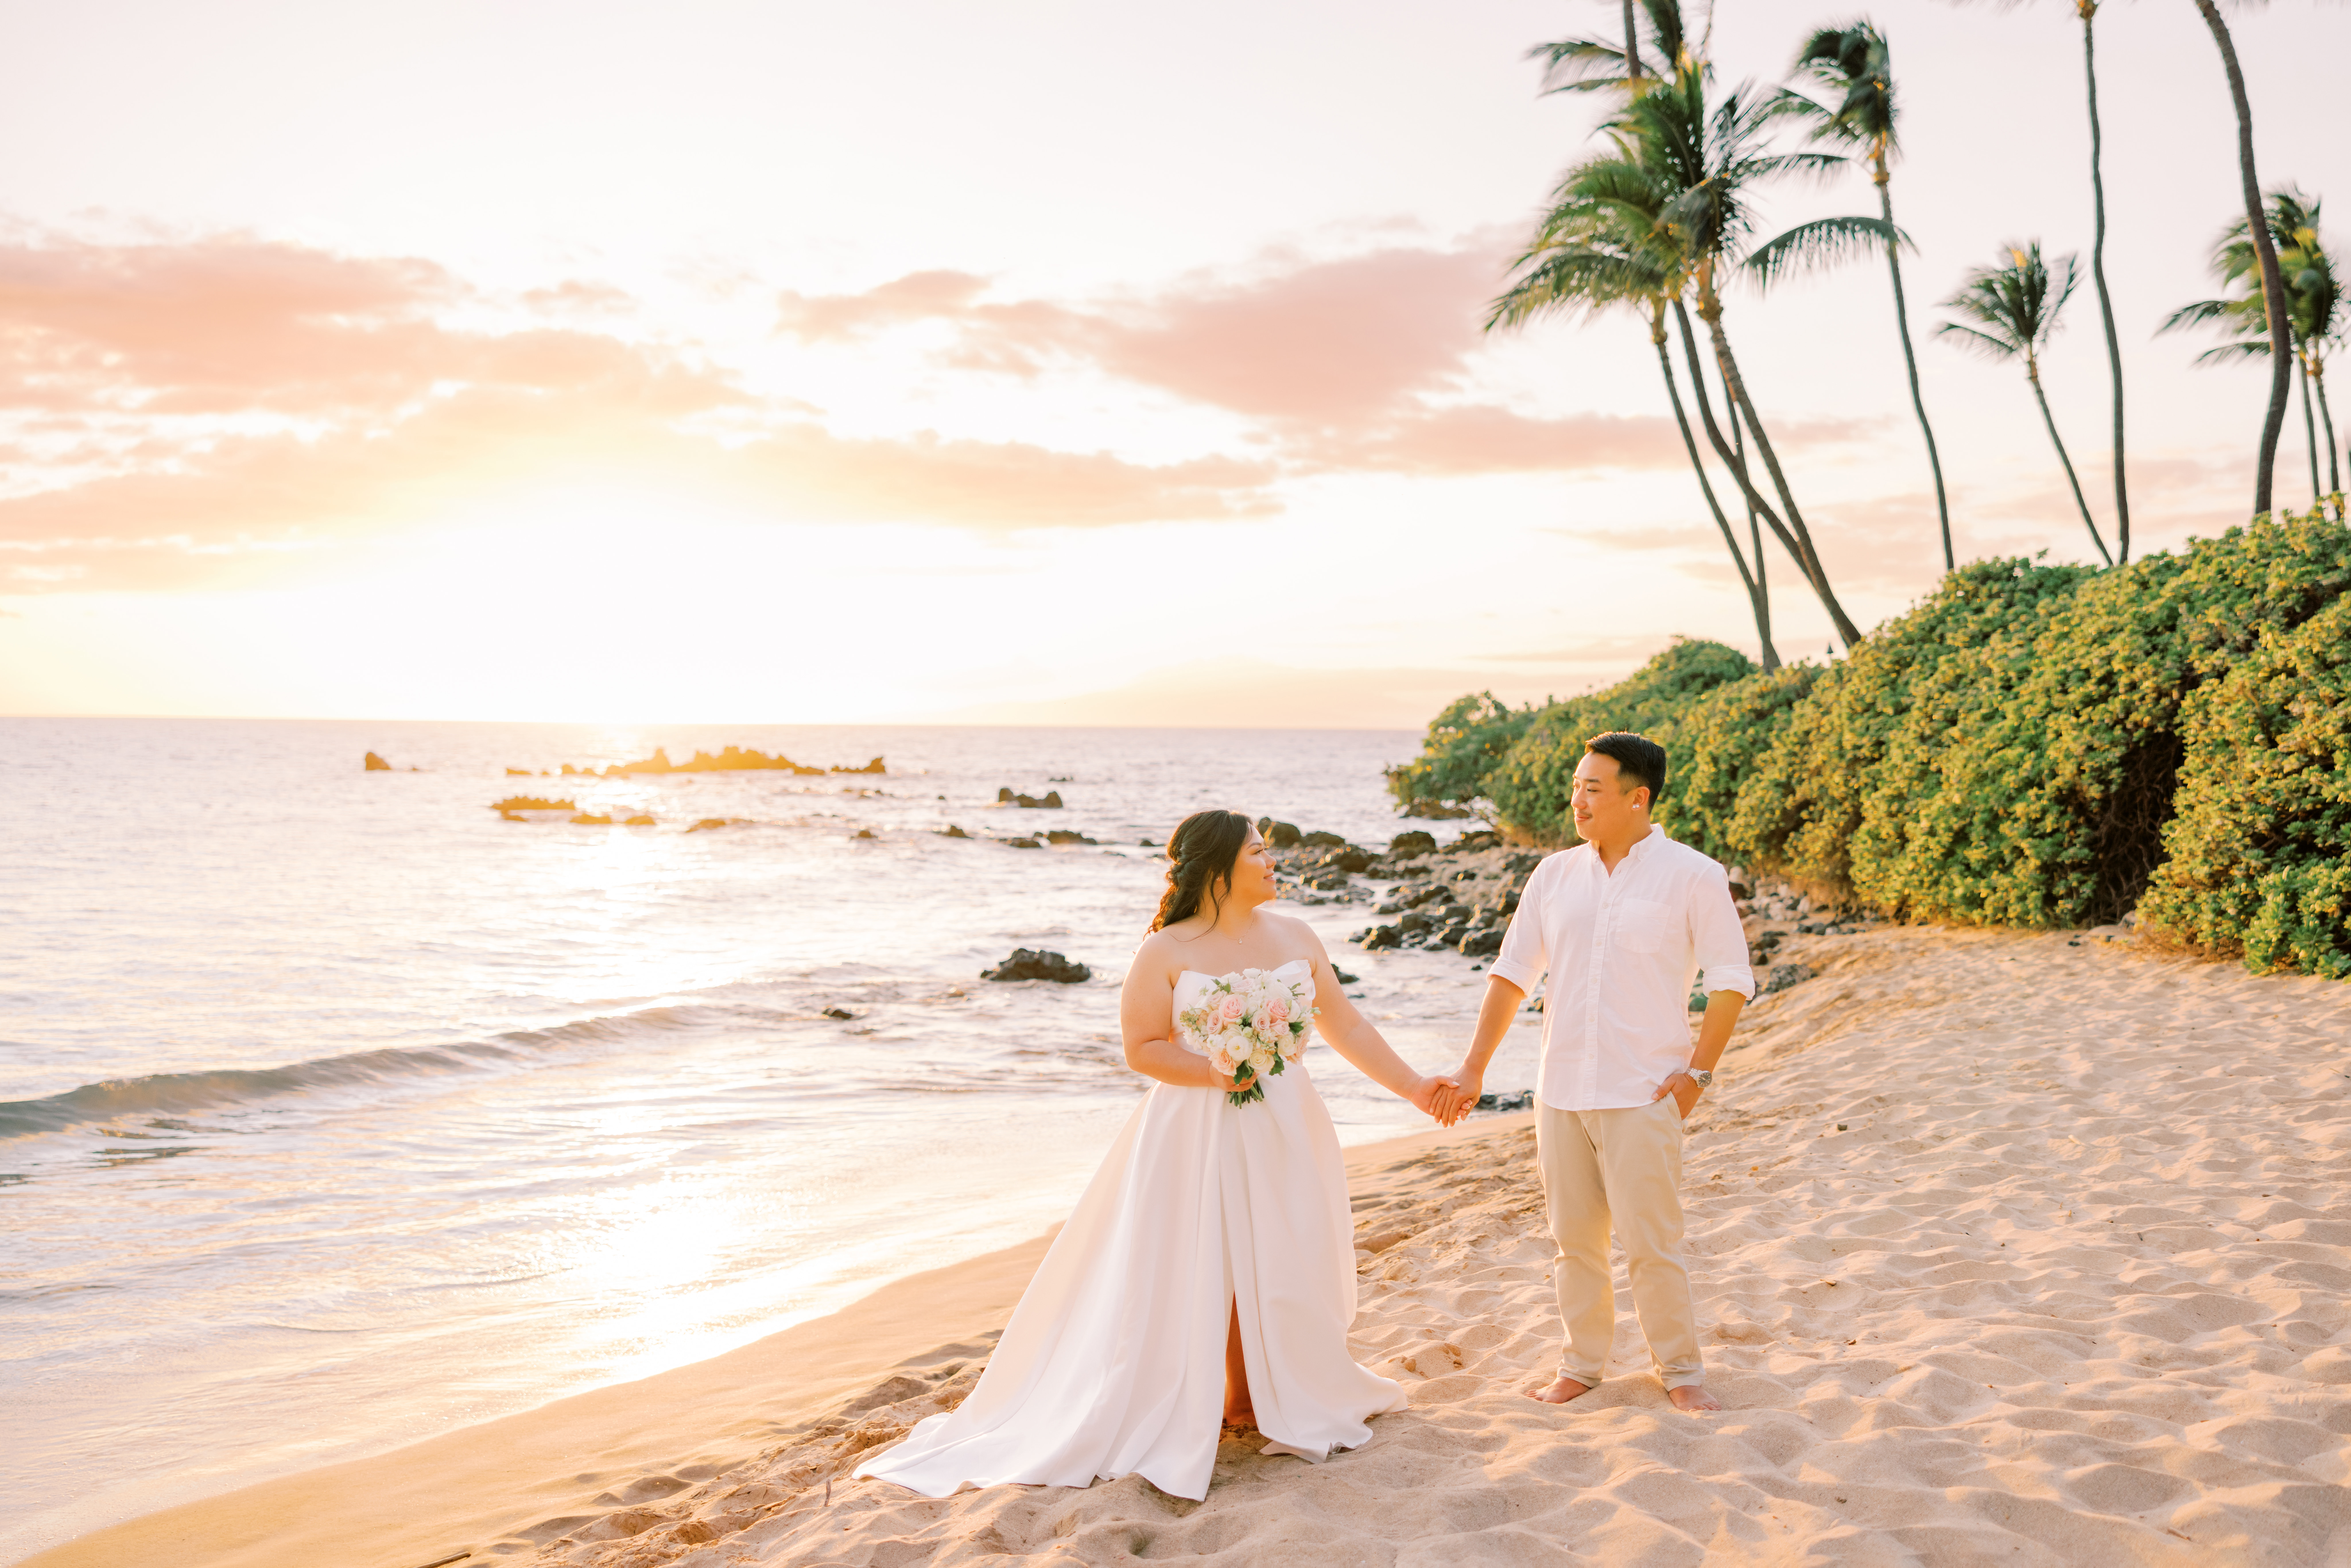 Woman wearing white wedding dress holding flowers and holding hands with a man wearing a shite shirt and brown pants while standing in sand at a beach.